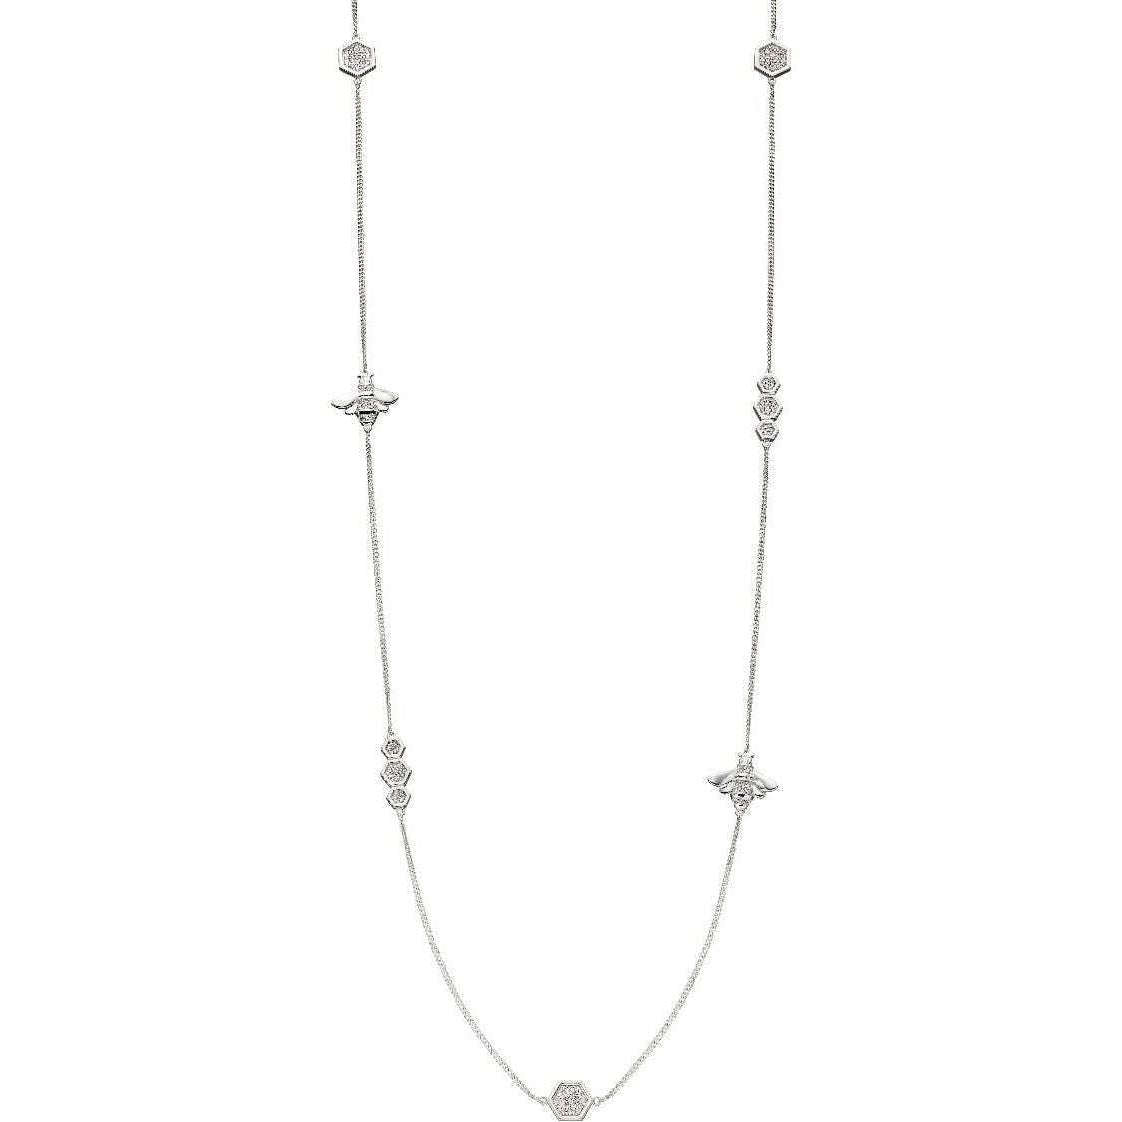 Elements Silver Bee Station Necklace - Silver